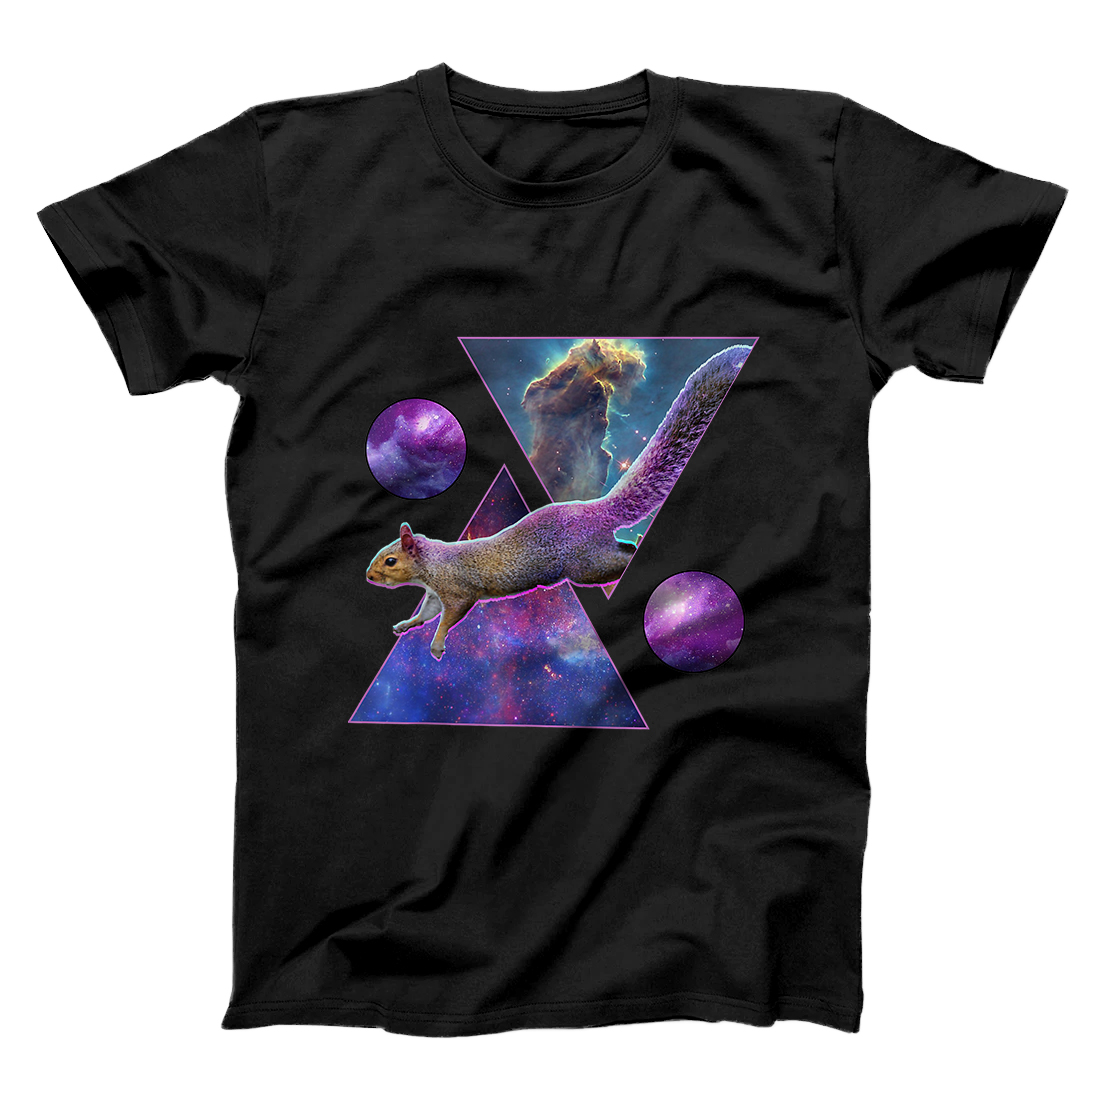 Personalized Vaporwave Squirrel In Space Art - Cool Aesthetic Design T-Shirt